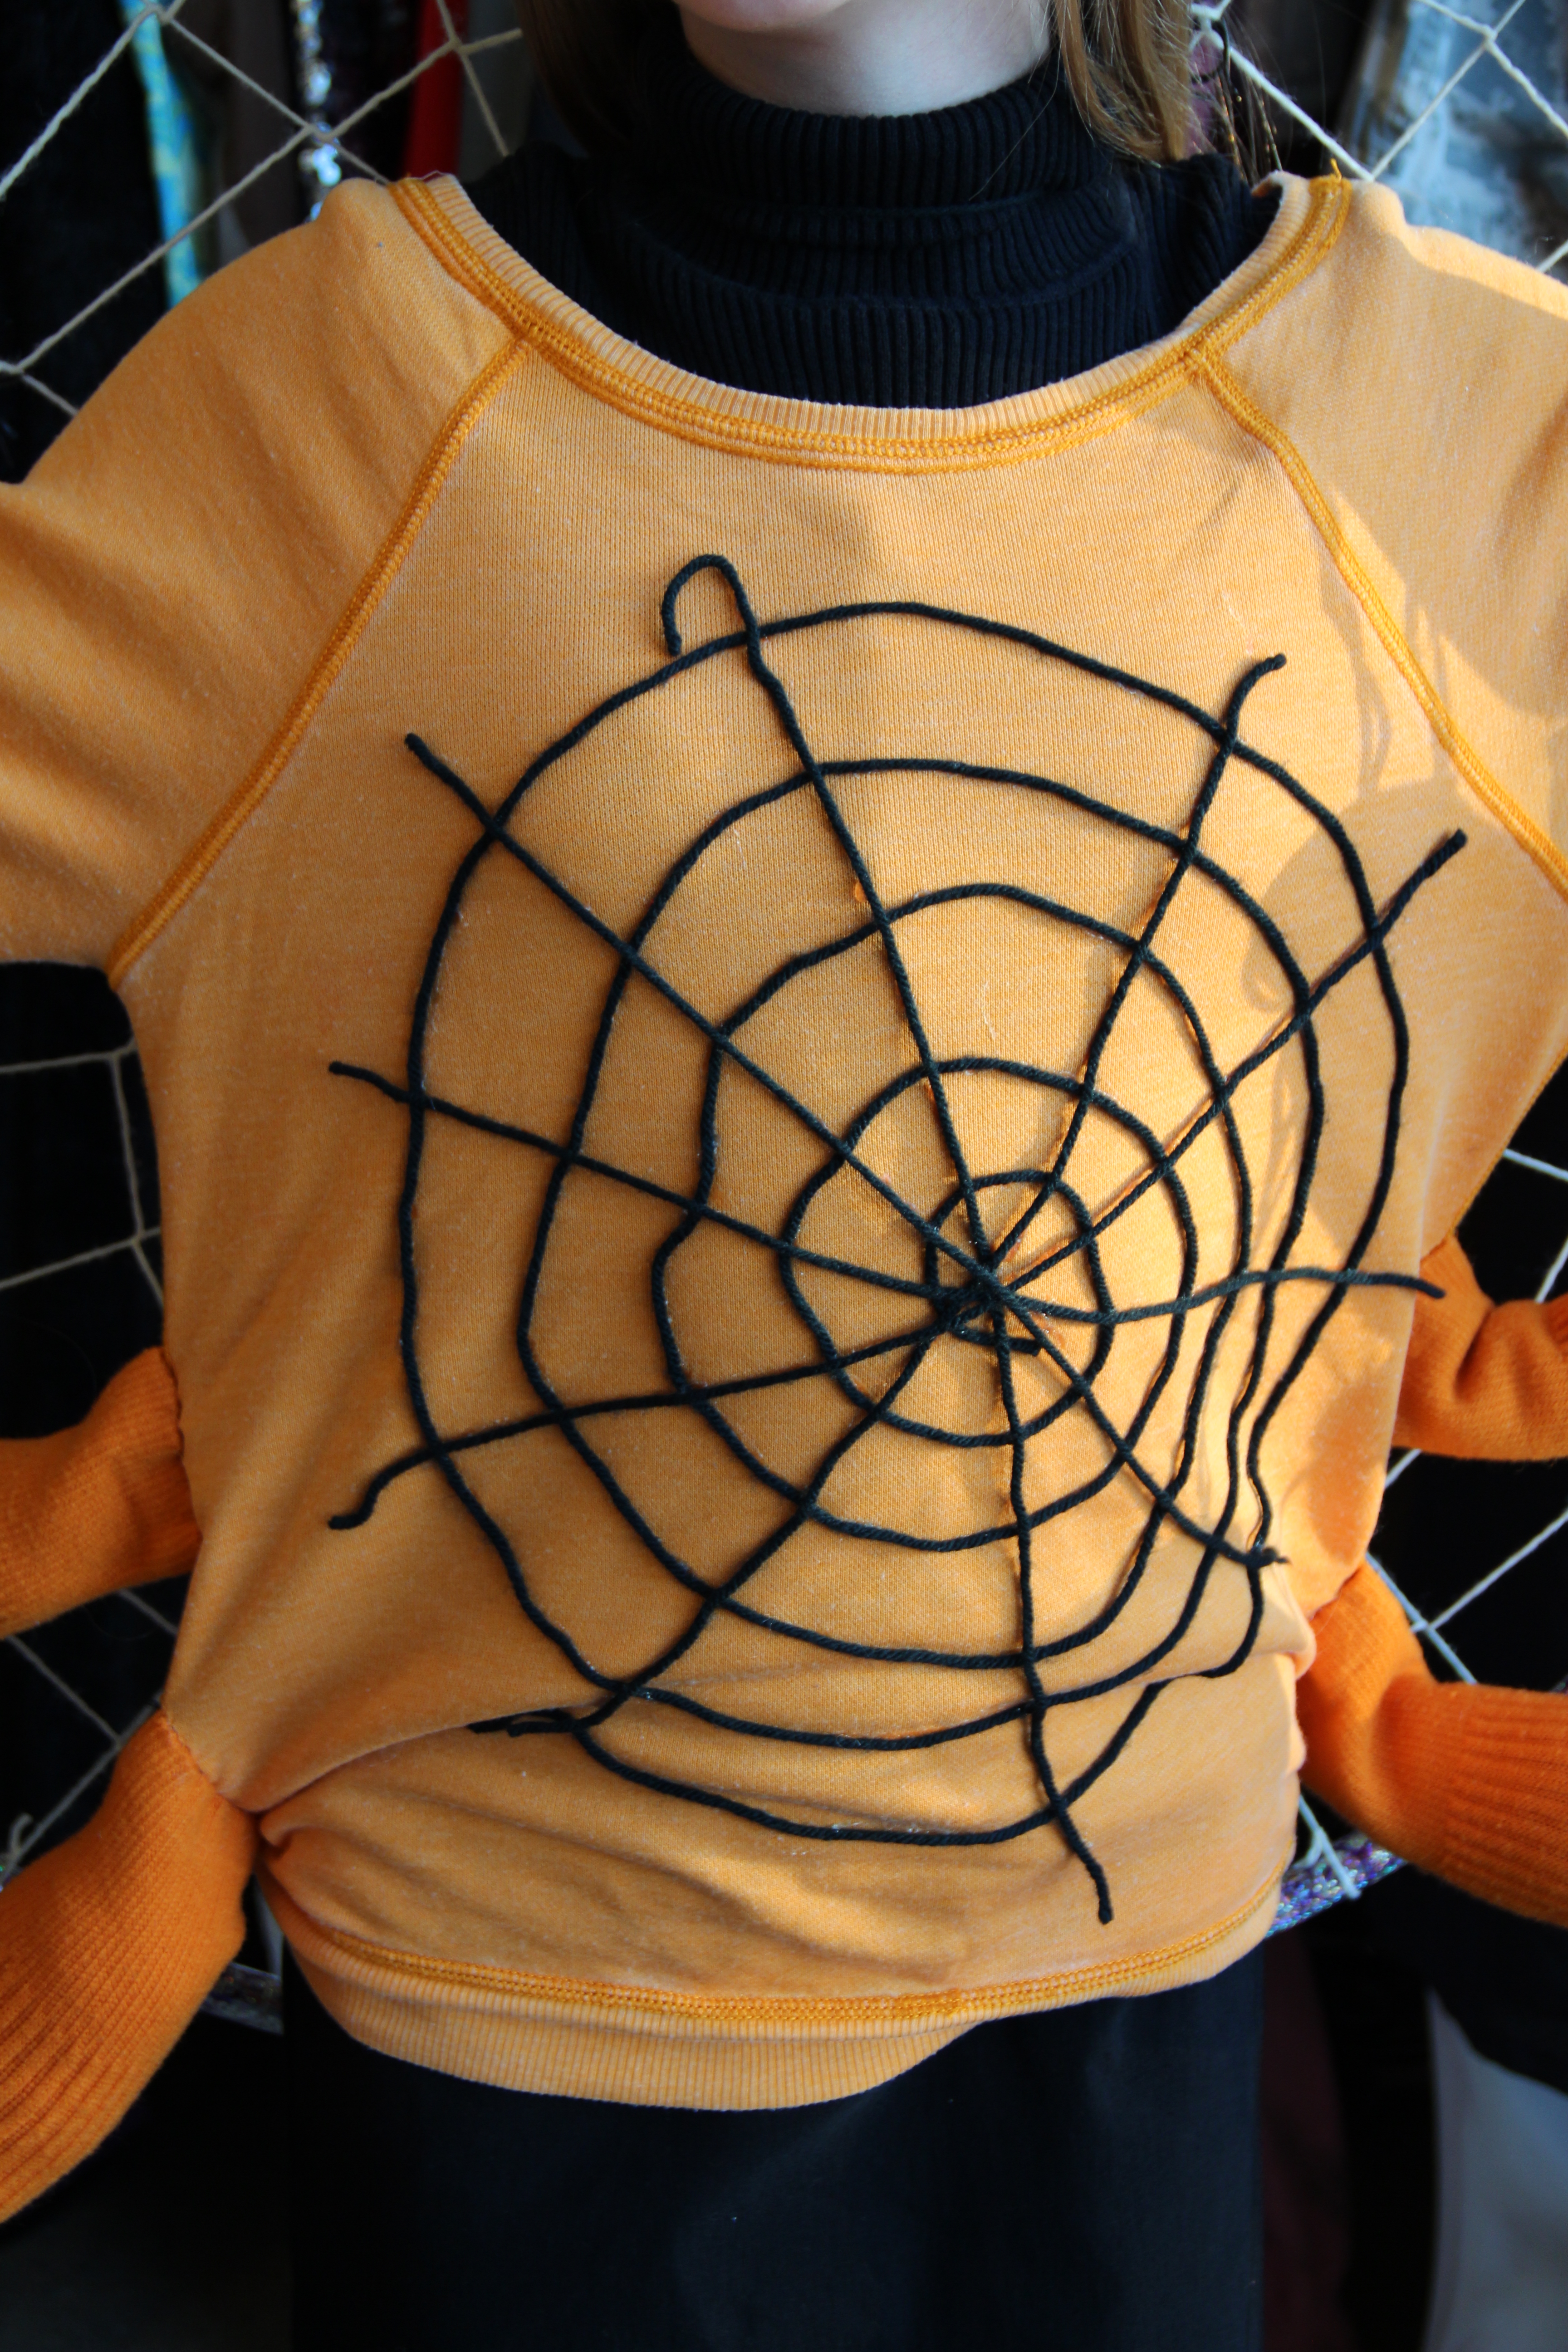 Lay additional yarn on the front of the sweat shirt in a spider web design. Hold in place with craft glue.